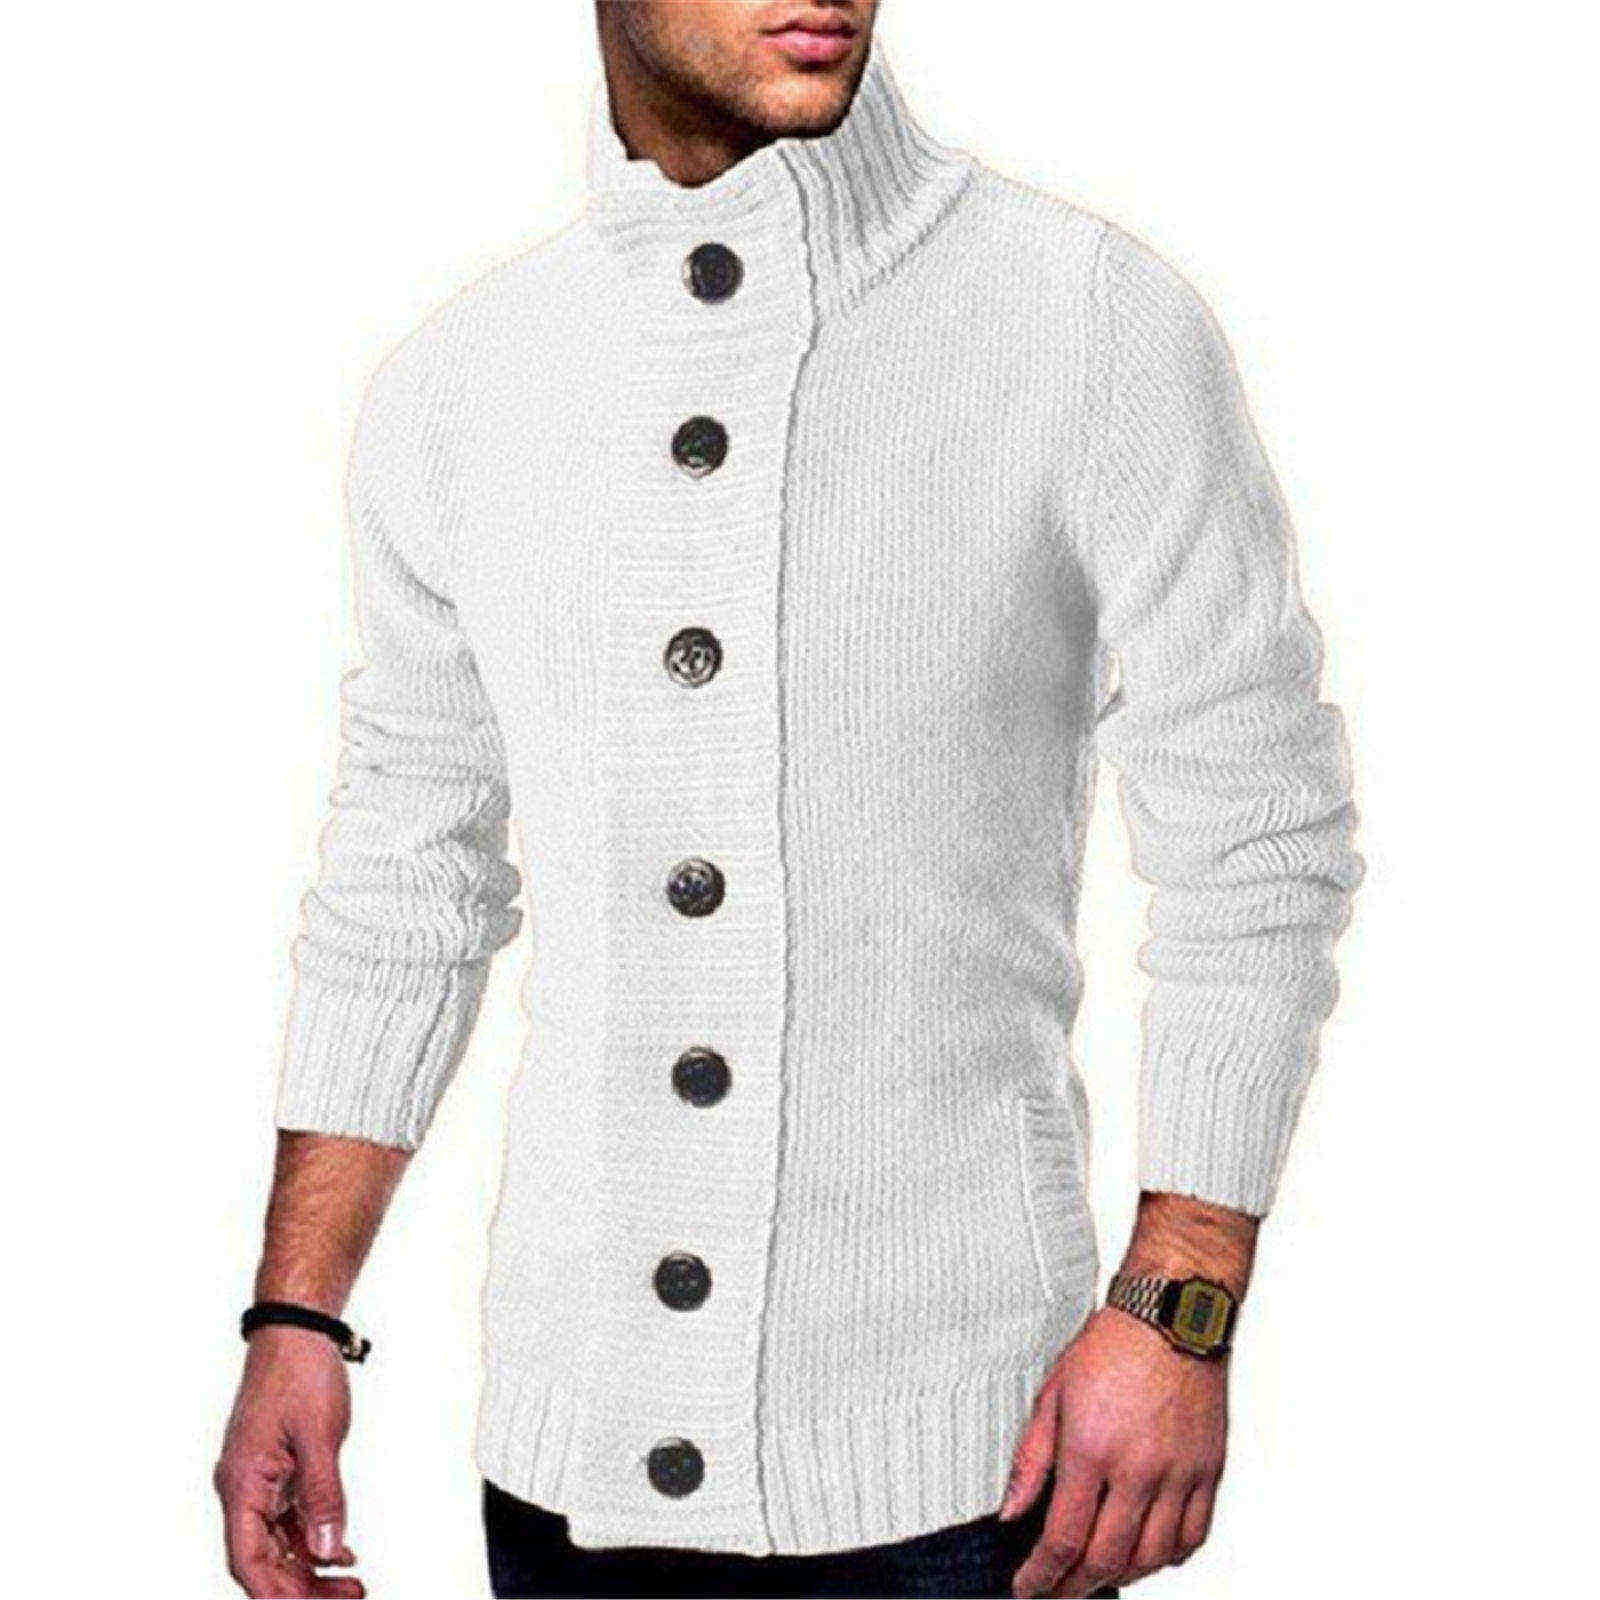 Mens Cardigan Jacket Chunky Sweater Knitted Trench Coat Jumper Knitwear Tops 